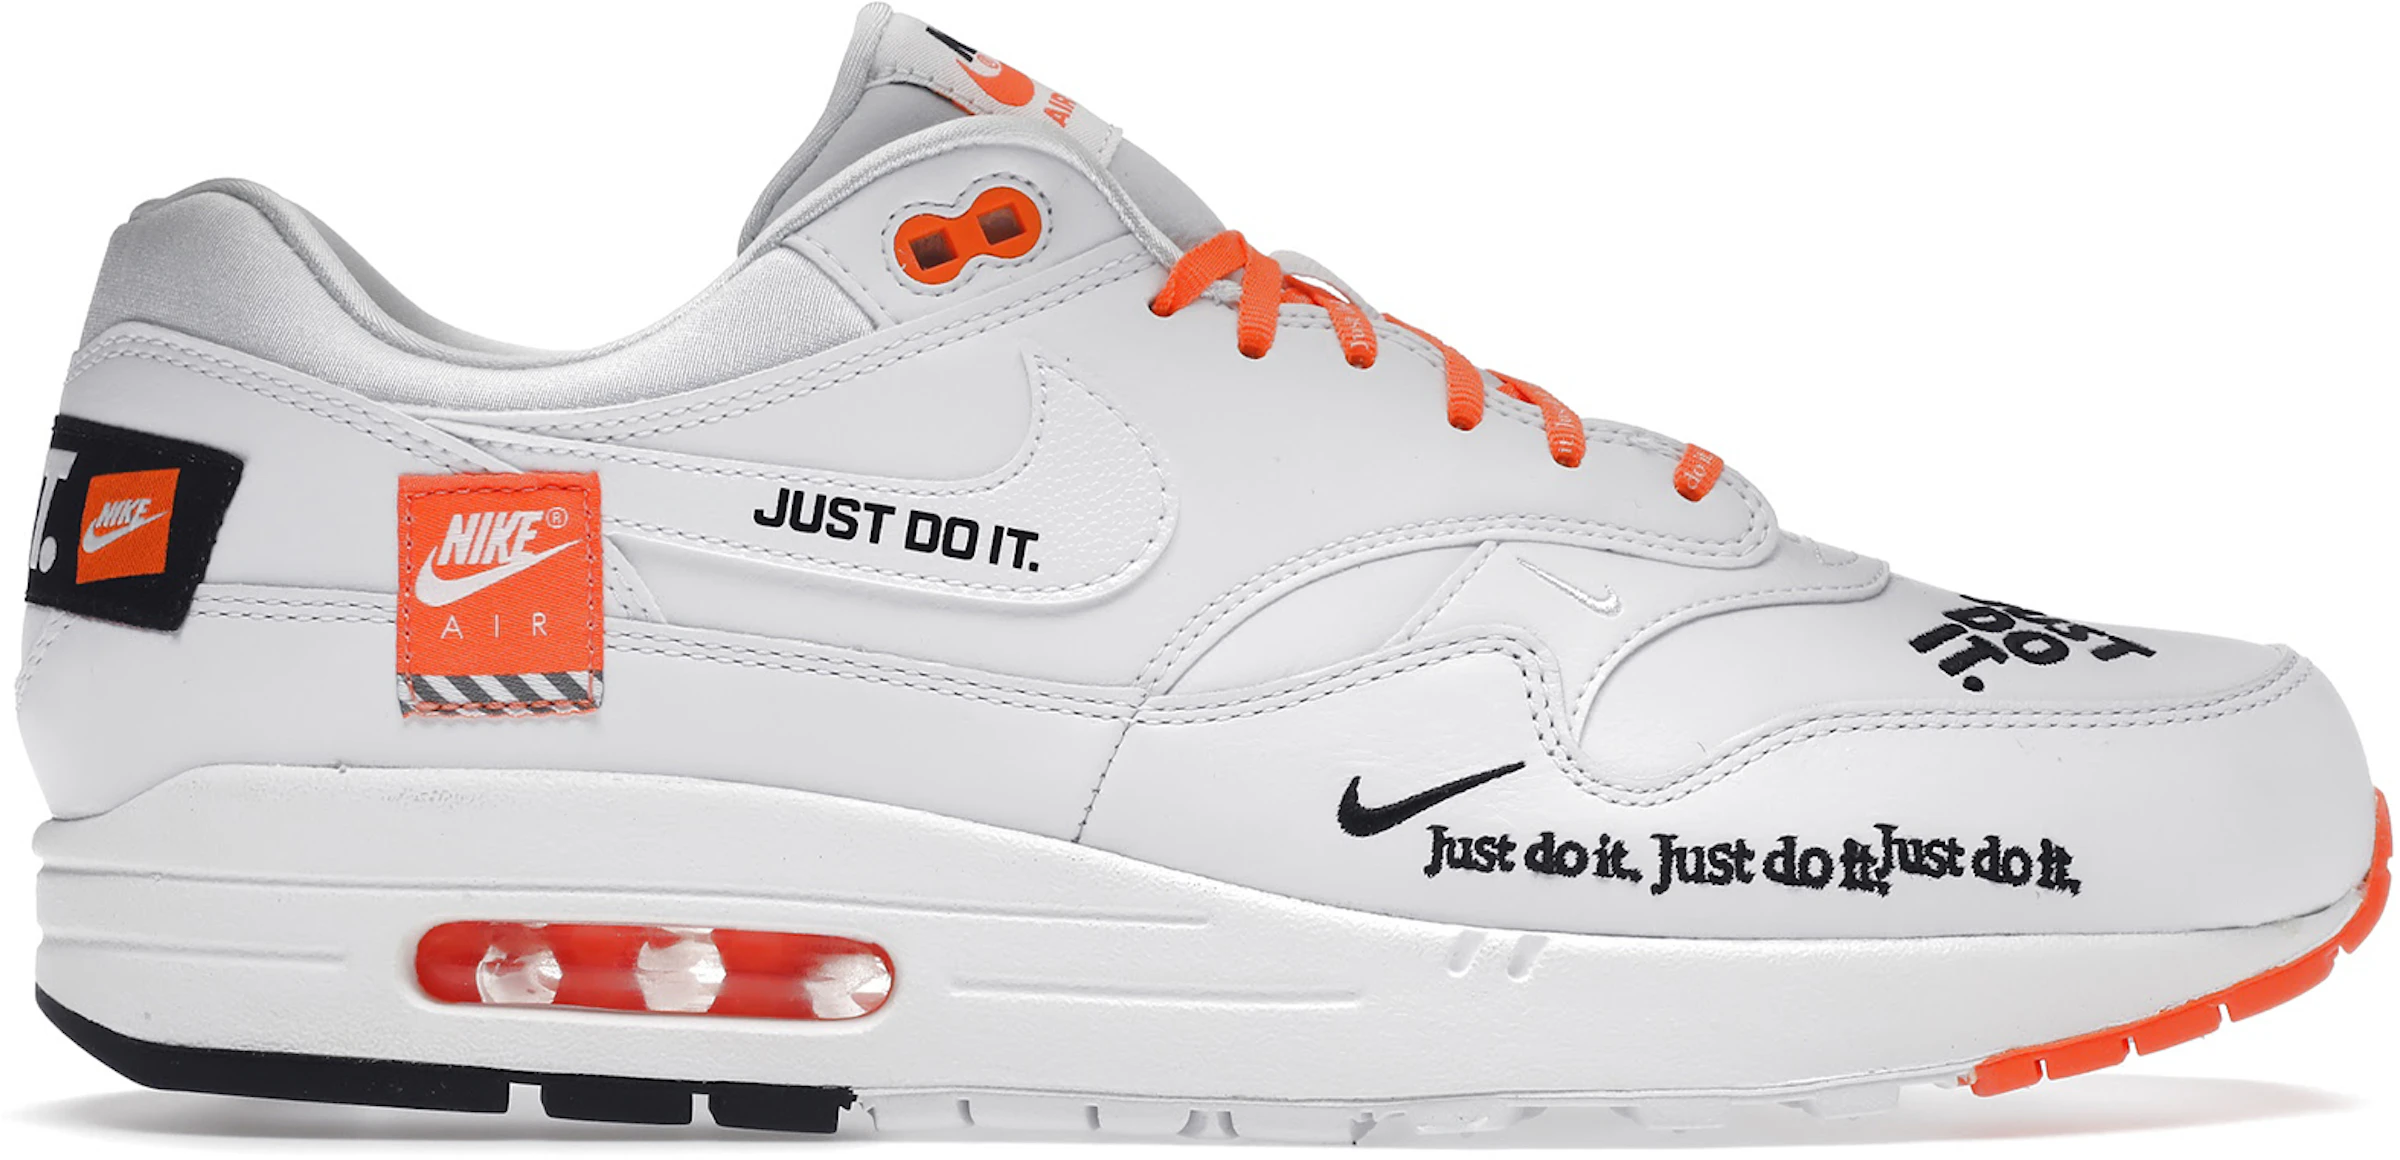 Lanzamiento conductor Anécdota Nike Air Max 1 Just Do It Pack White - AO1021-100 - ES